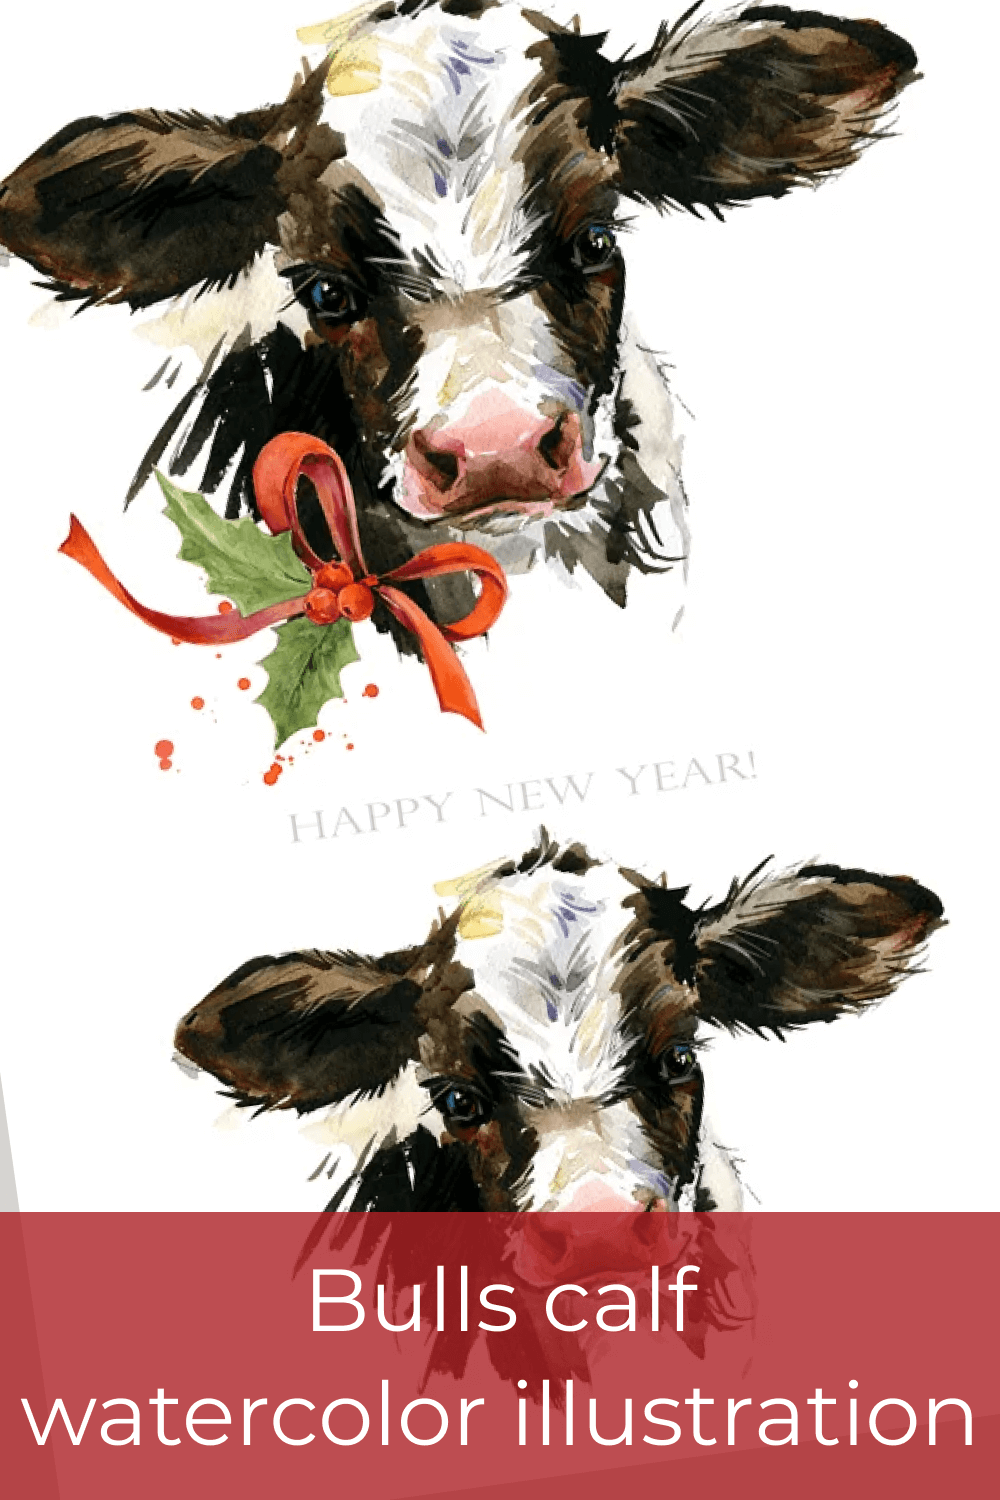 Festive cow for everyone.